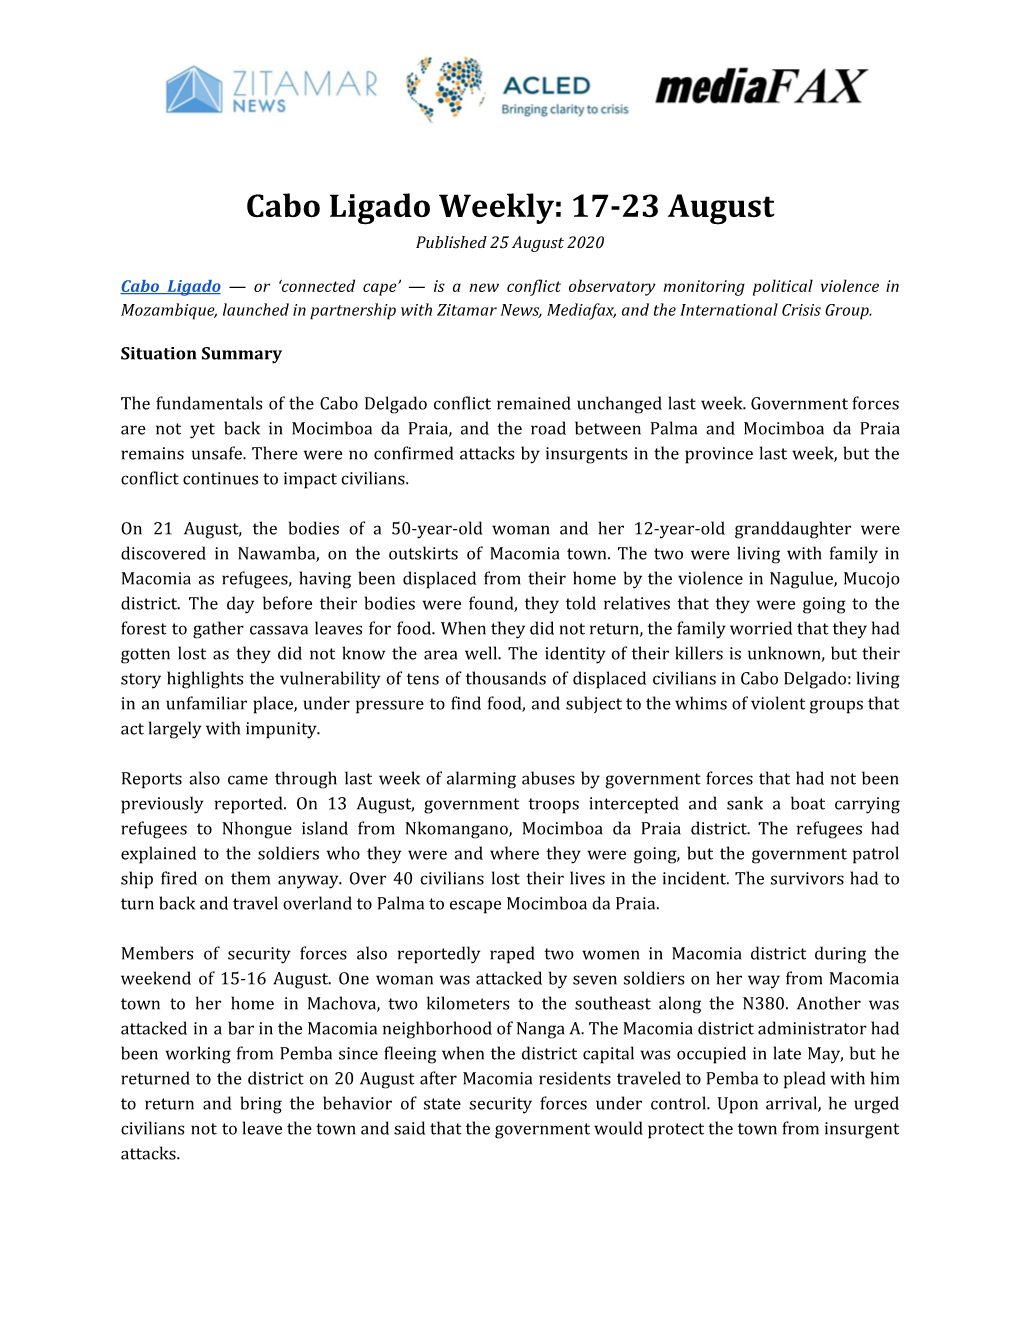 Cabo Ligado Weekly: 17-23 August 2020